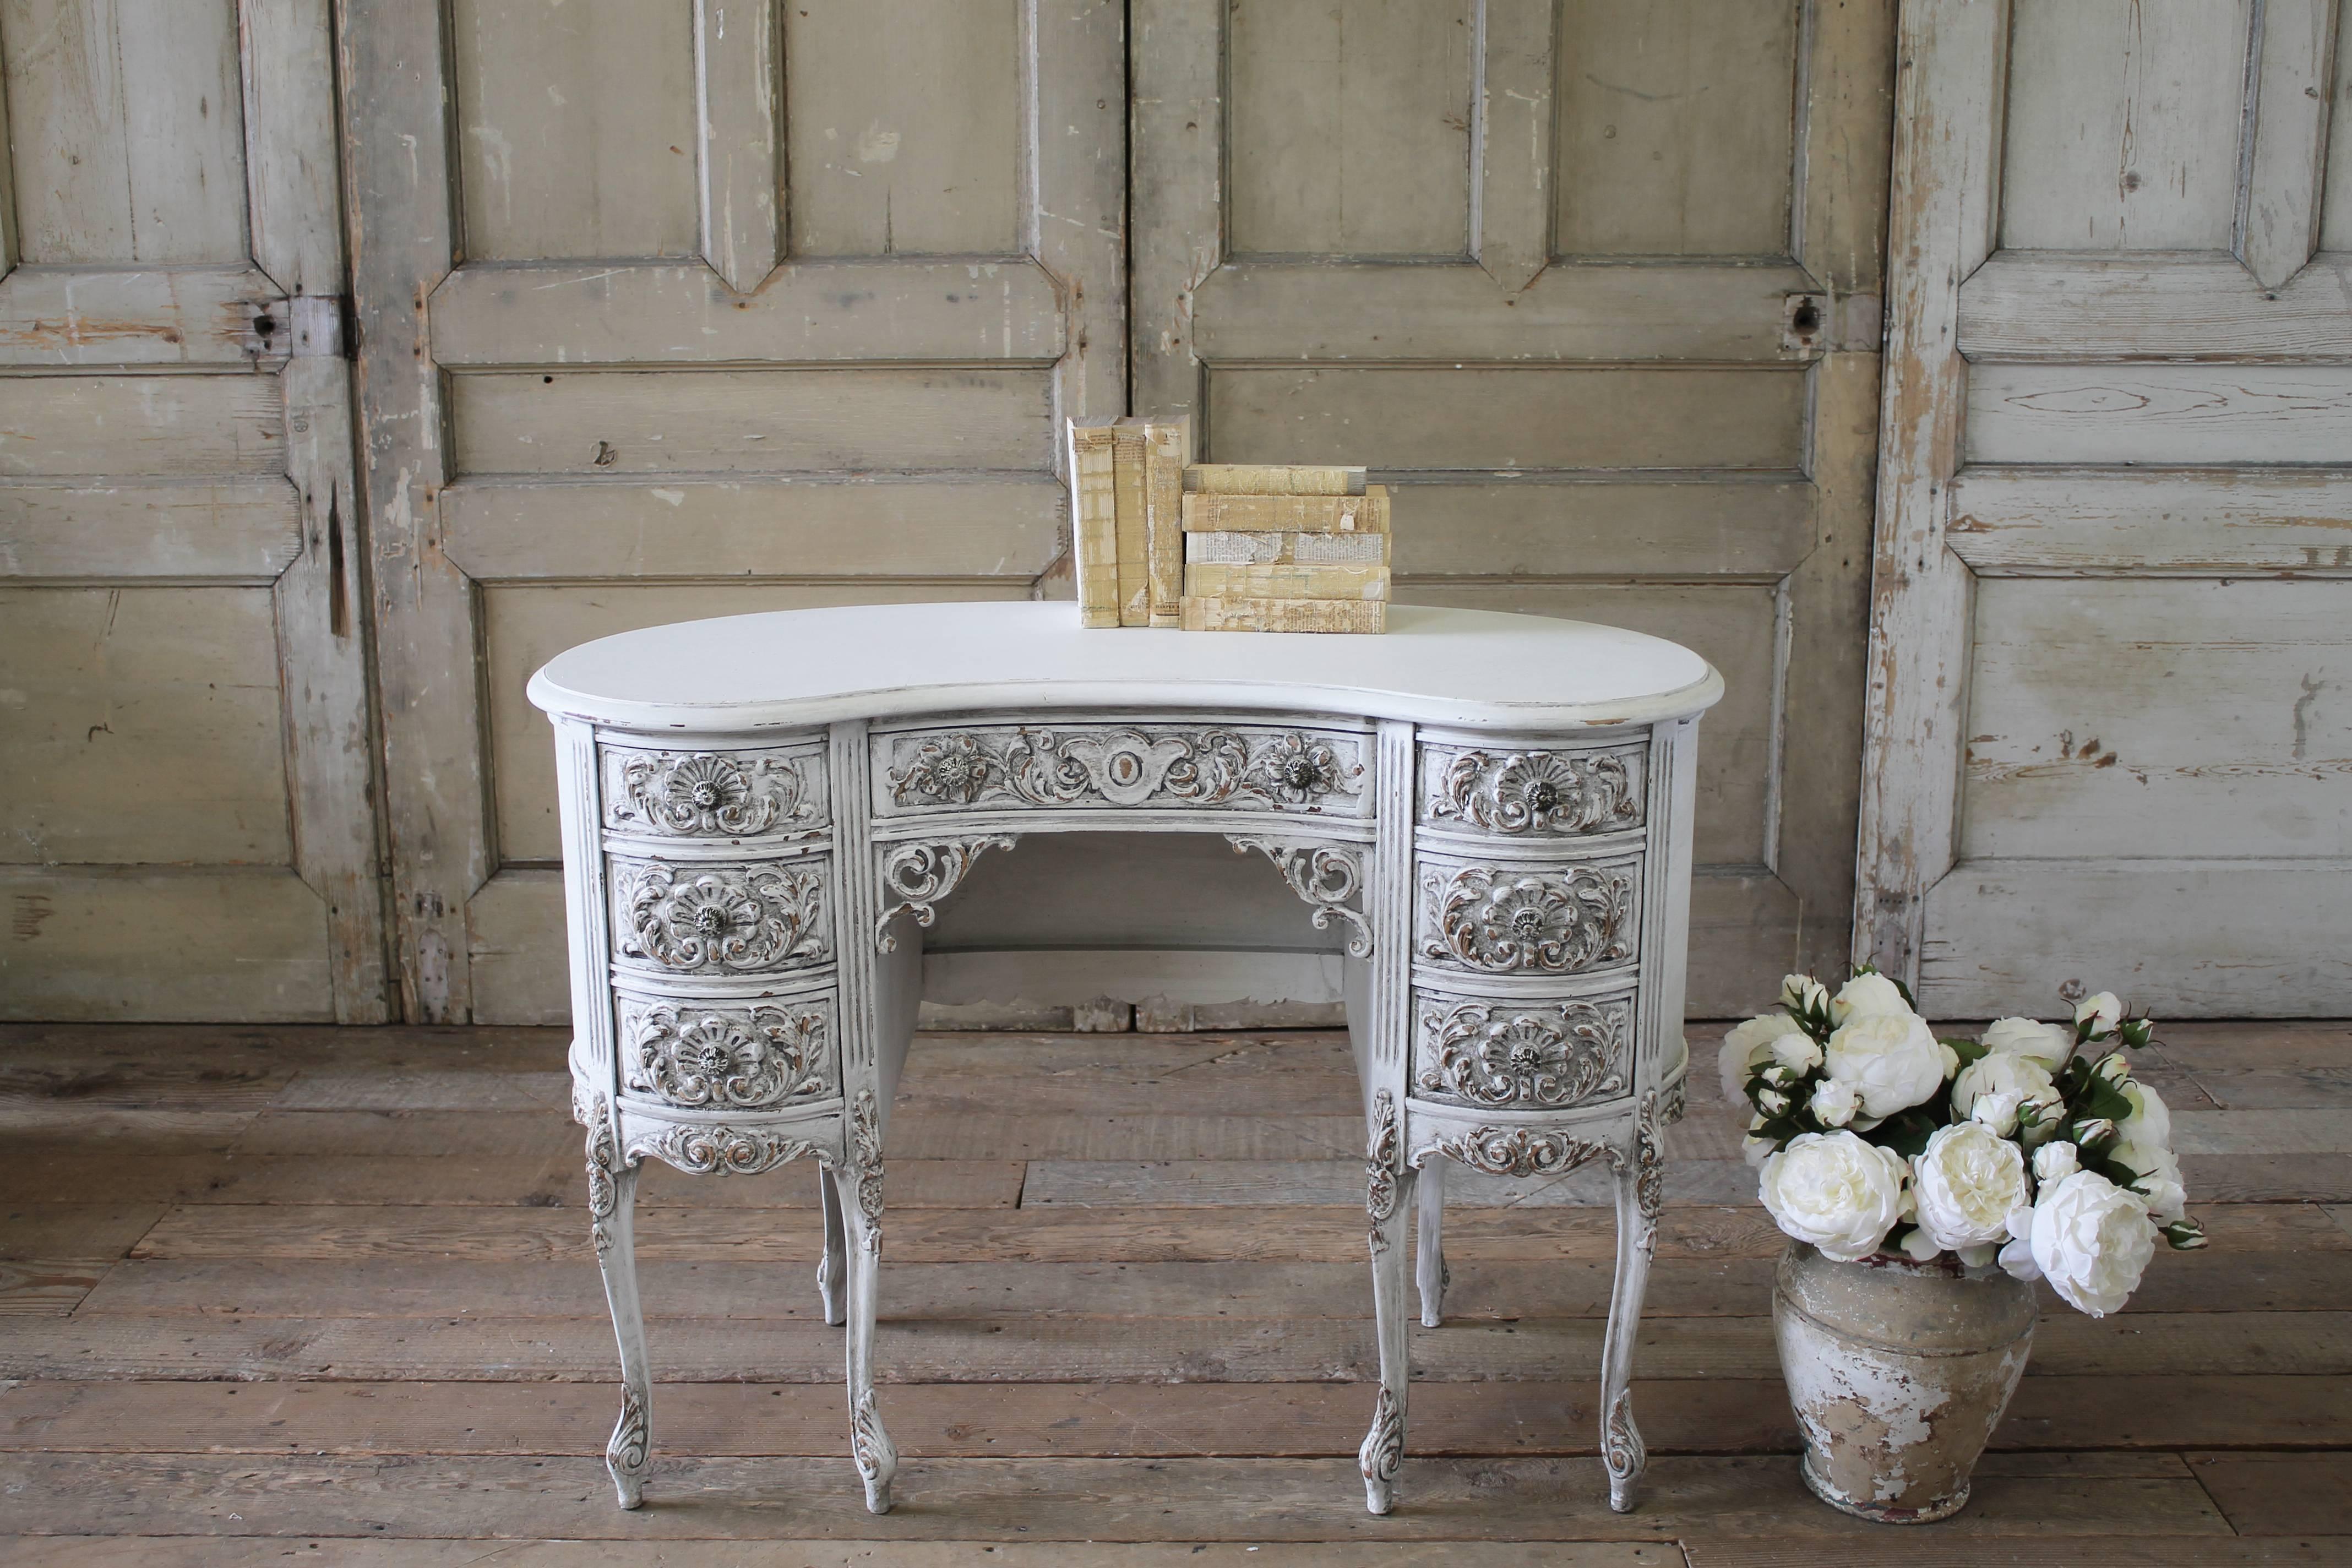 Beautiful vanity has been painted in our oyster white, with an antique distressed finish. Heavily carved with scrolls and floral motifs. Original metal drawer knobs, and dovetail finish. Legs are strong and sturdy, ready for daily use.
Finished on